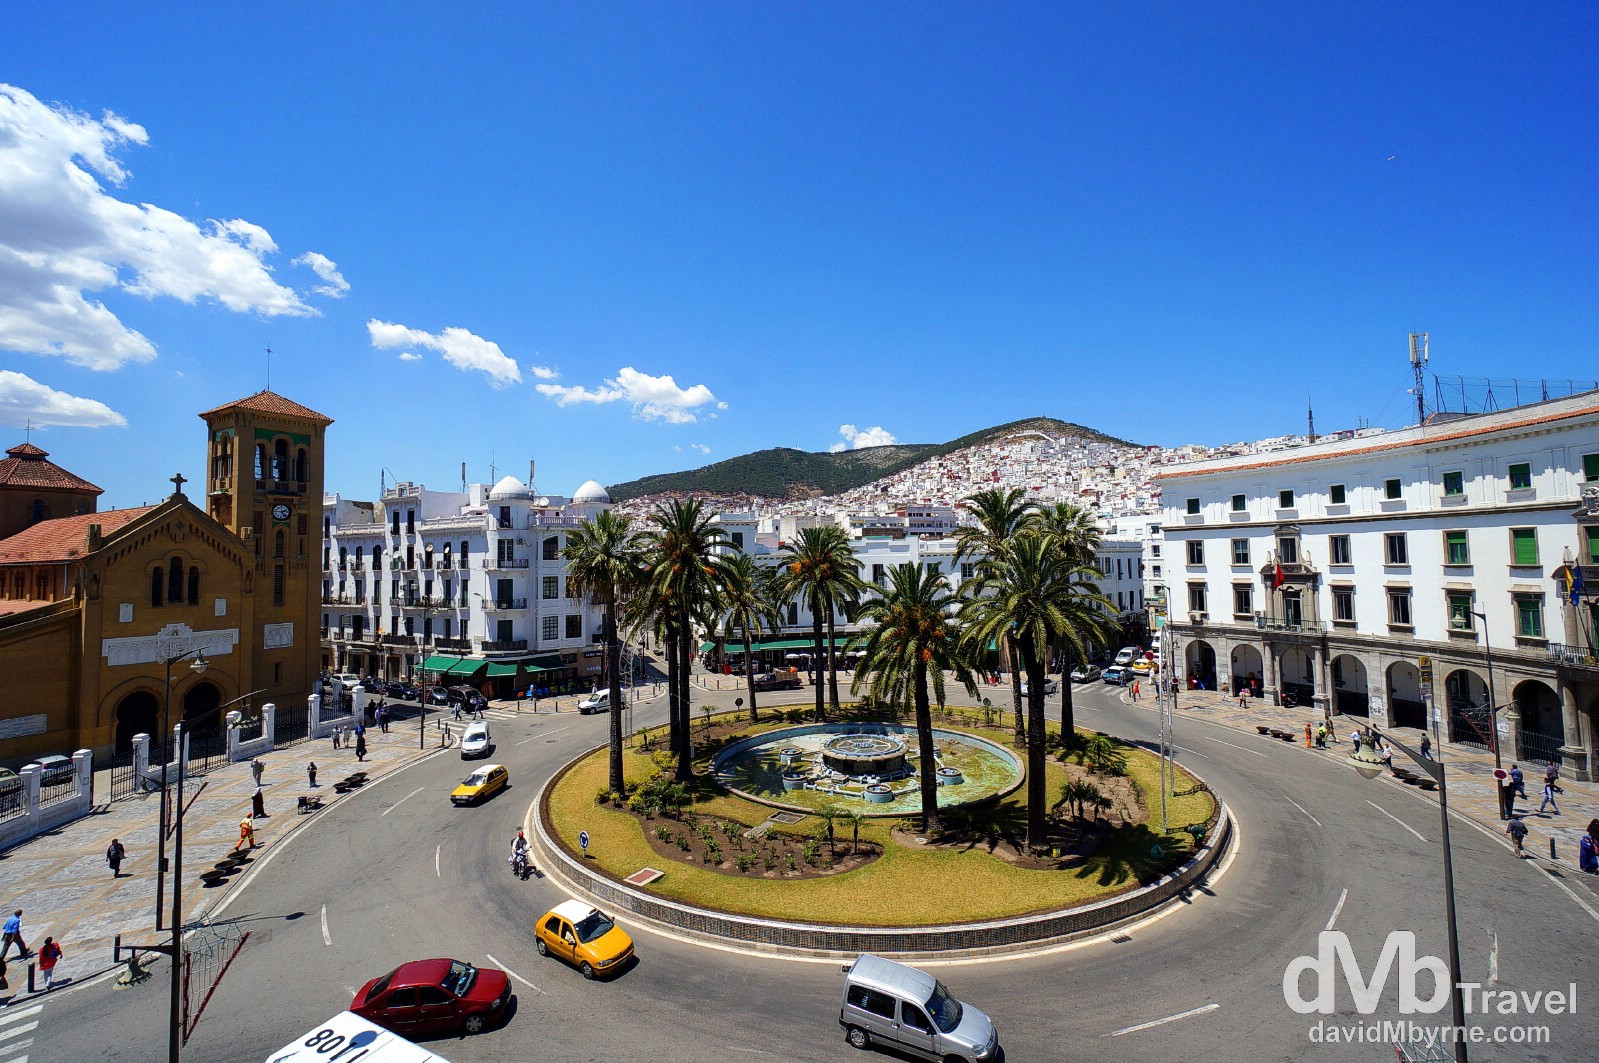 The view from room 11 in the Pension Iberia overlooking the Ville Nouvelle's Place Moulay El Mehdi in Tetouan, northern Morocco. June 2nd, 2014.  